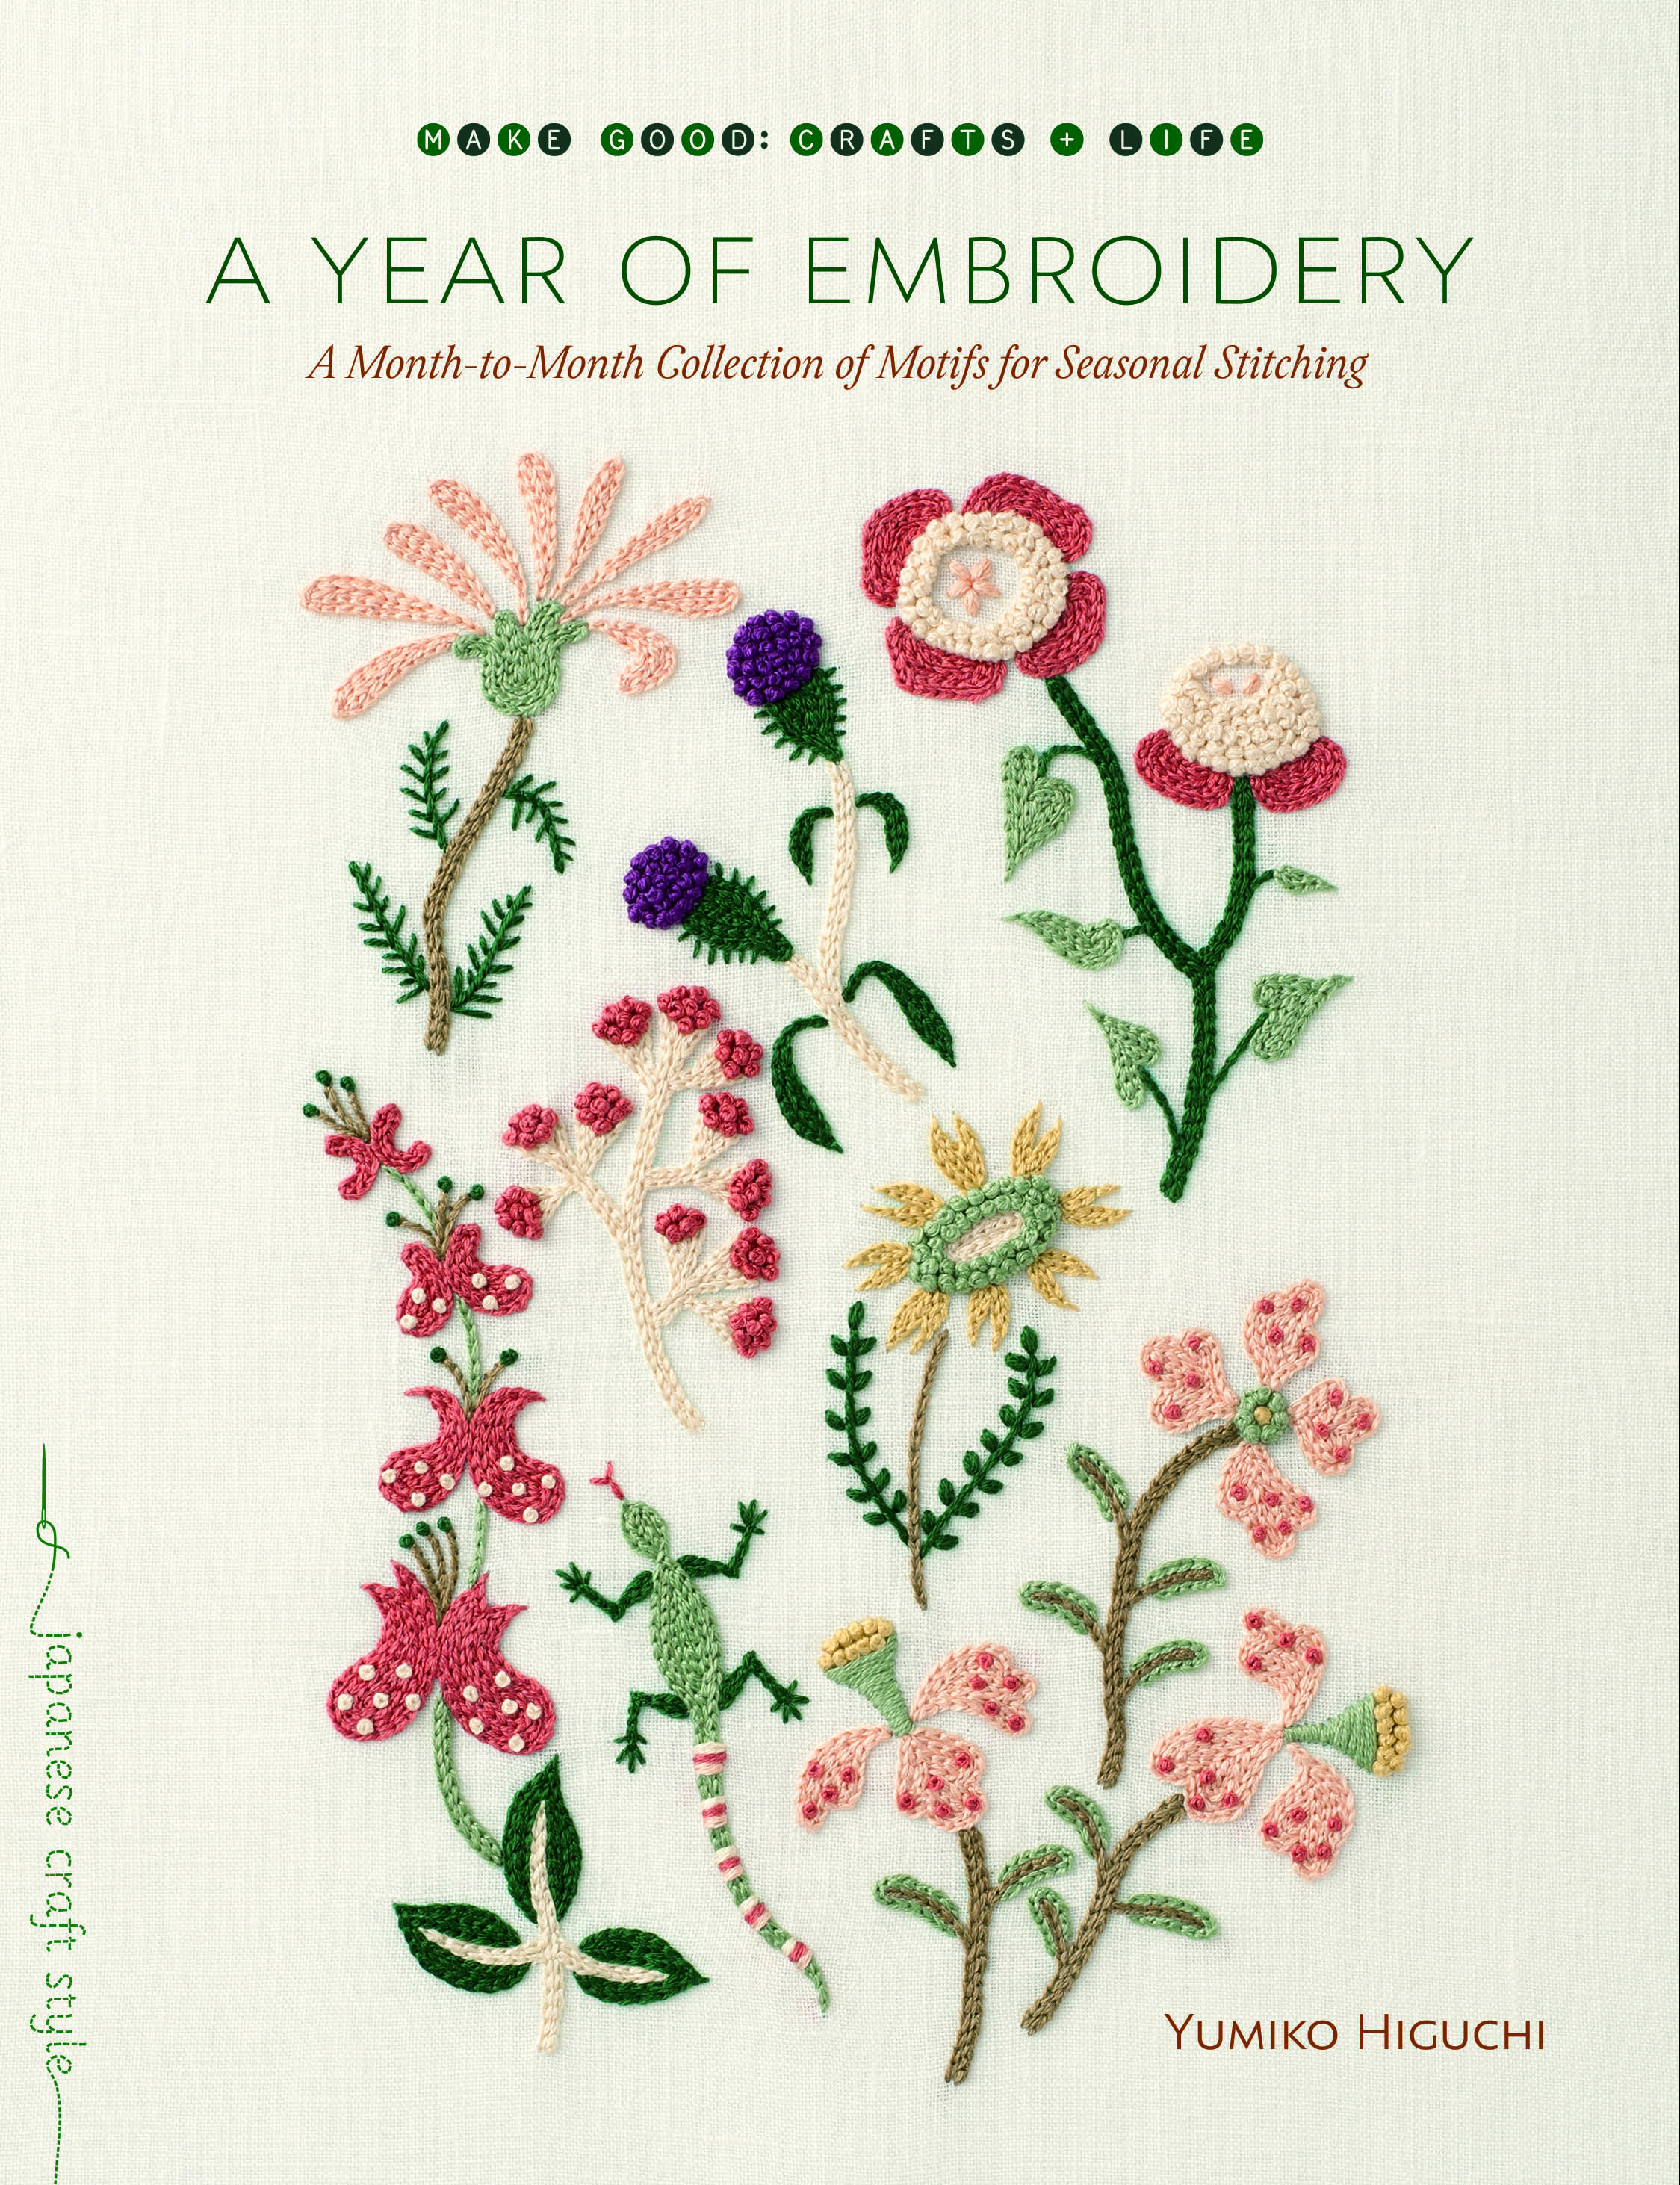 Diy Embroidery Patterns Diy Floral Cactus Embroidery Projects From A Year Of Embroidery